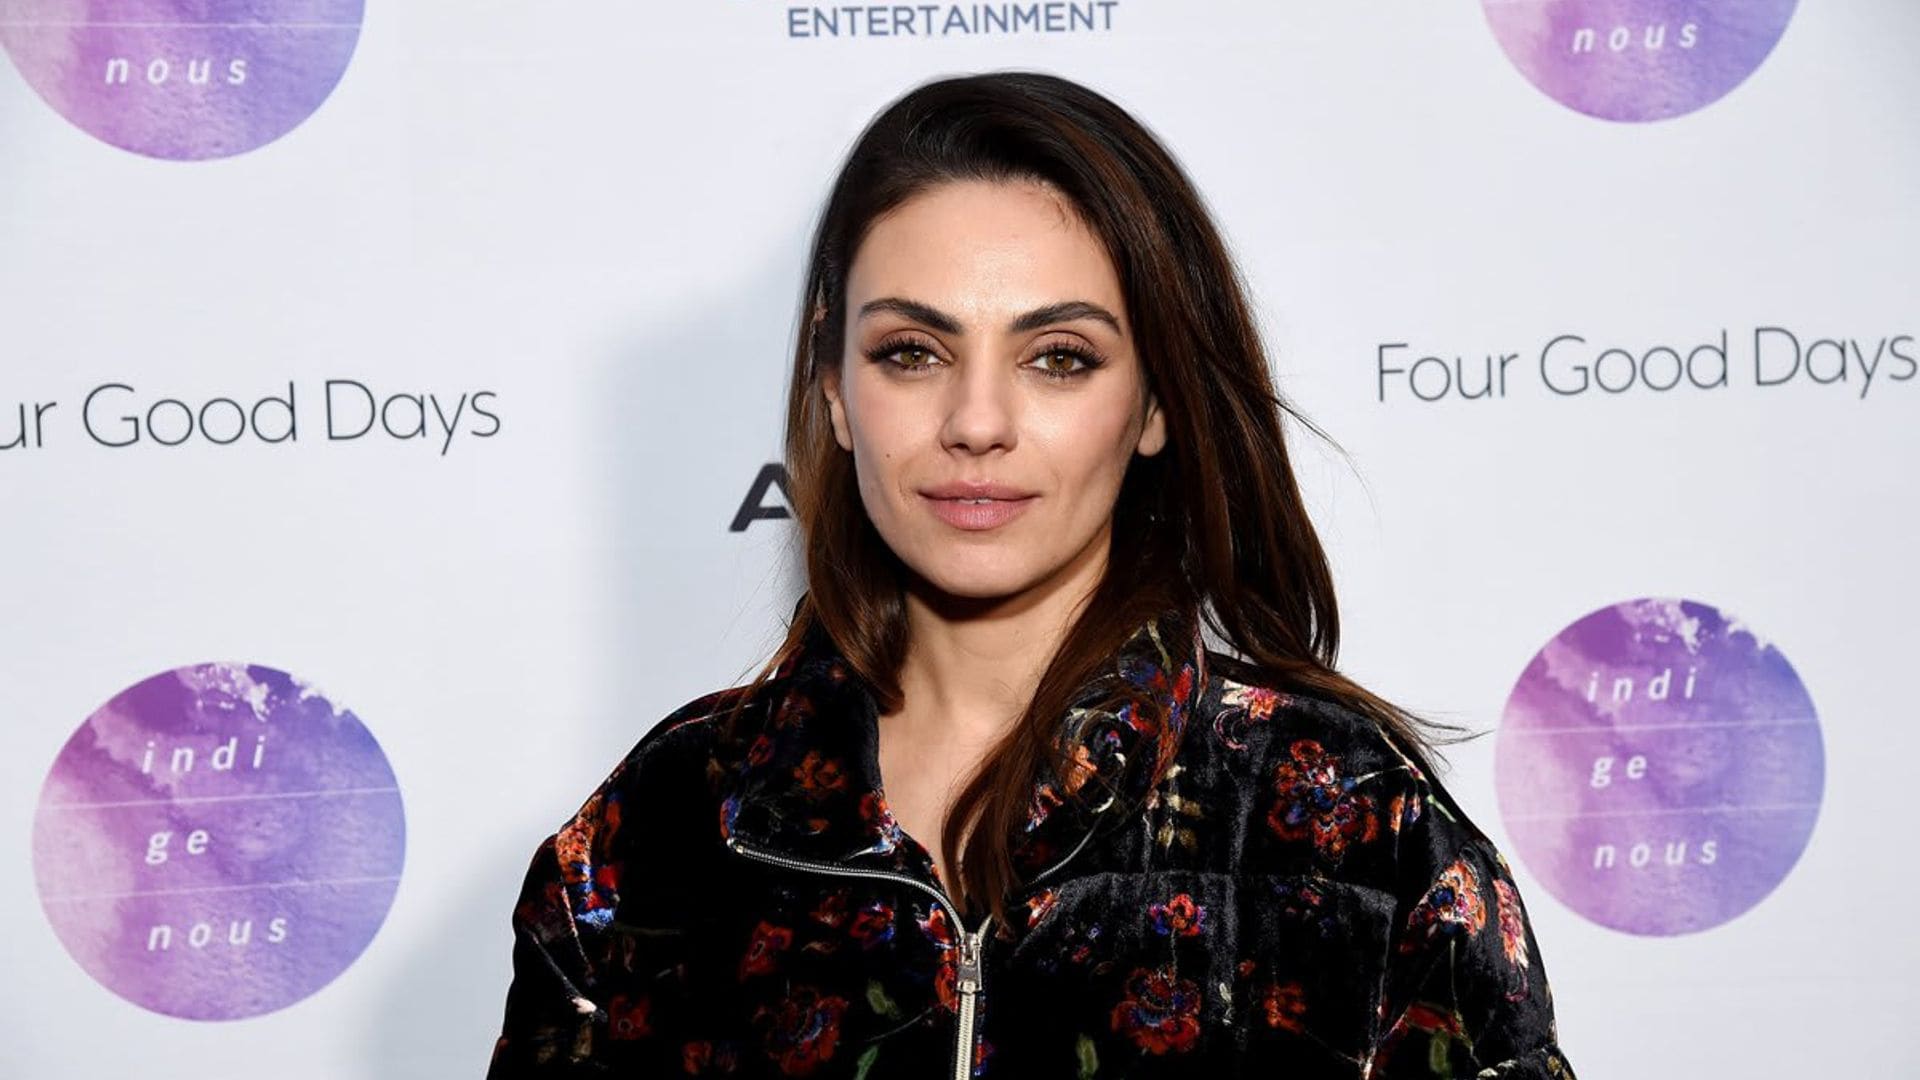 Mila Kunis shares her experience with COVID-19 vaccine